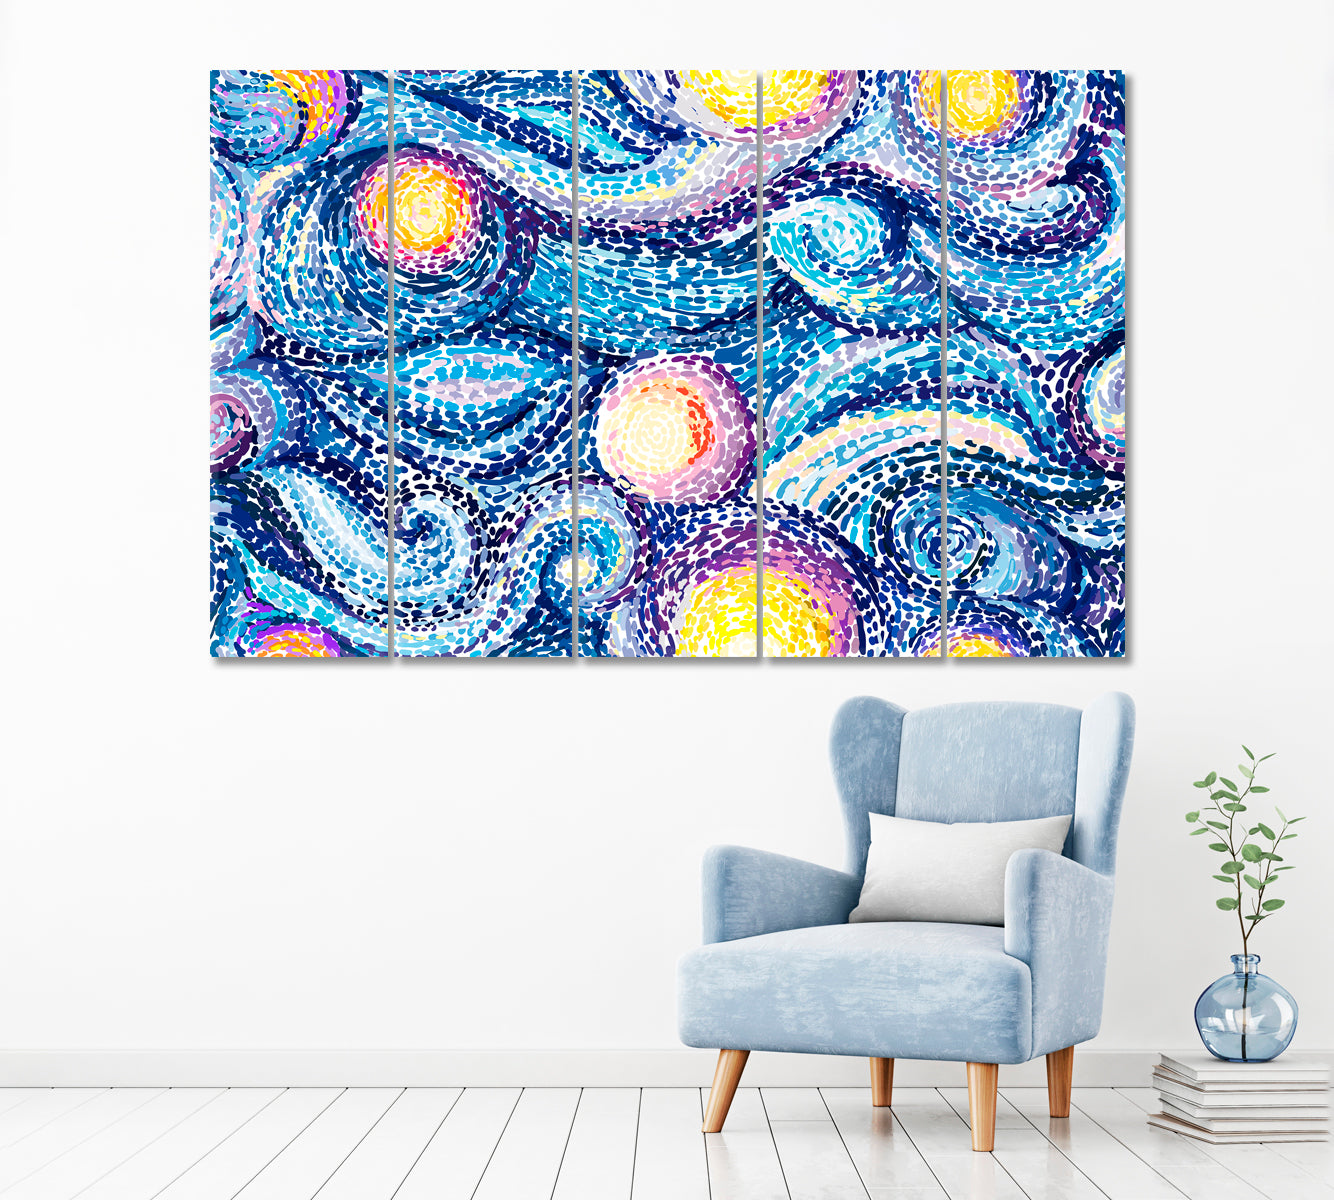 Starry Night Canvas Print ArtLexy 5 Panels 36"x24" inches 